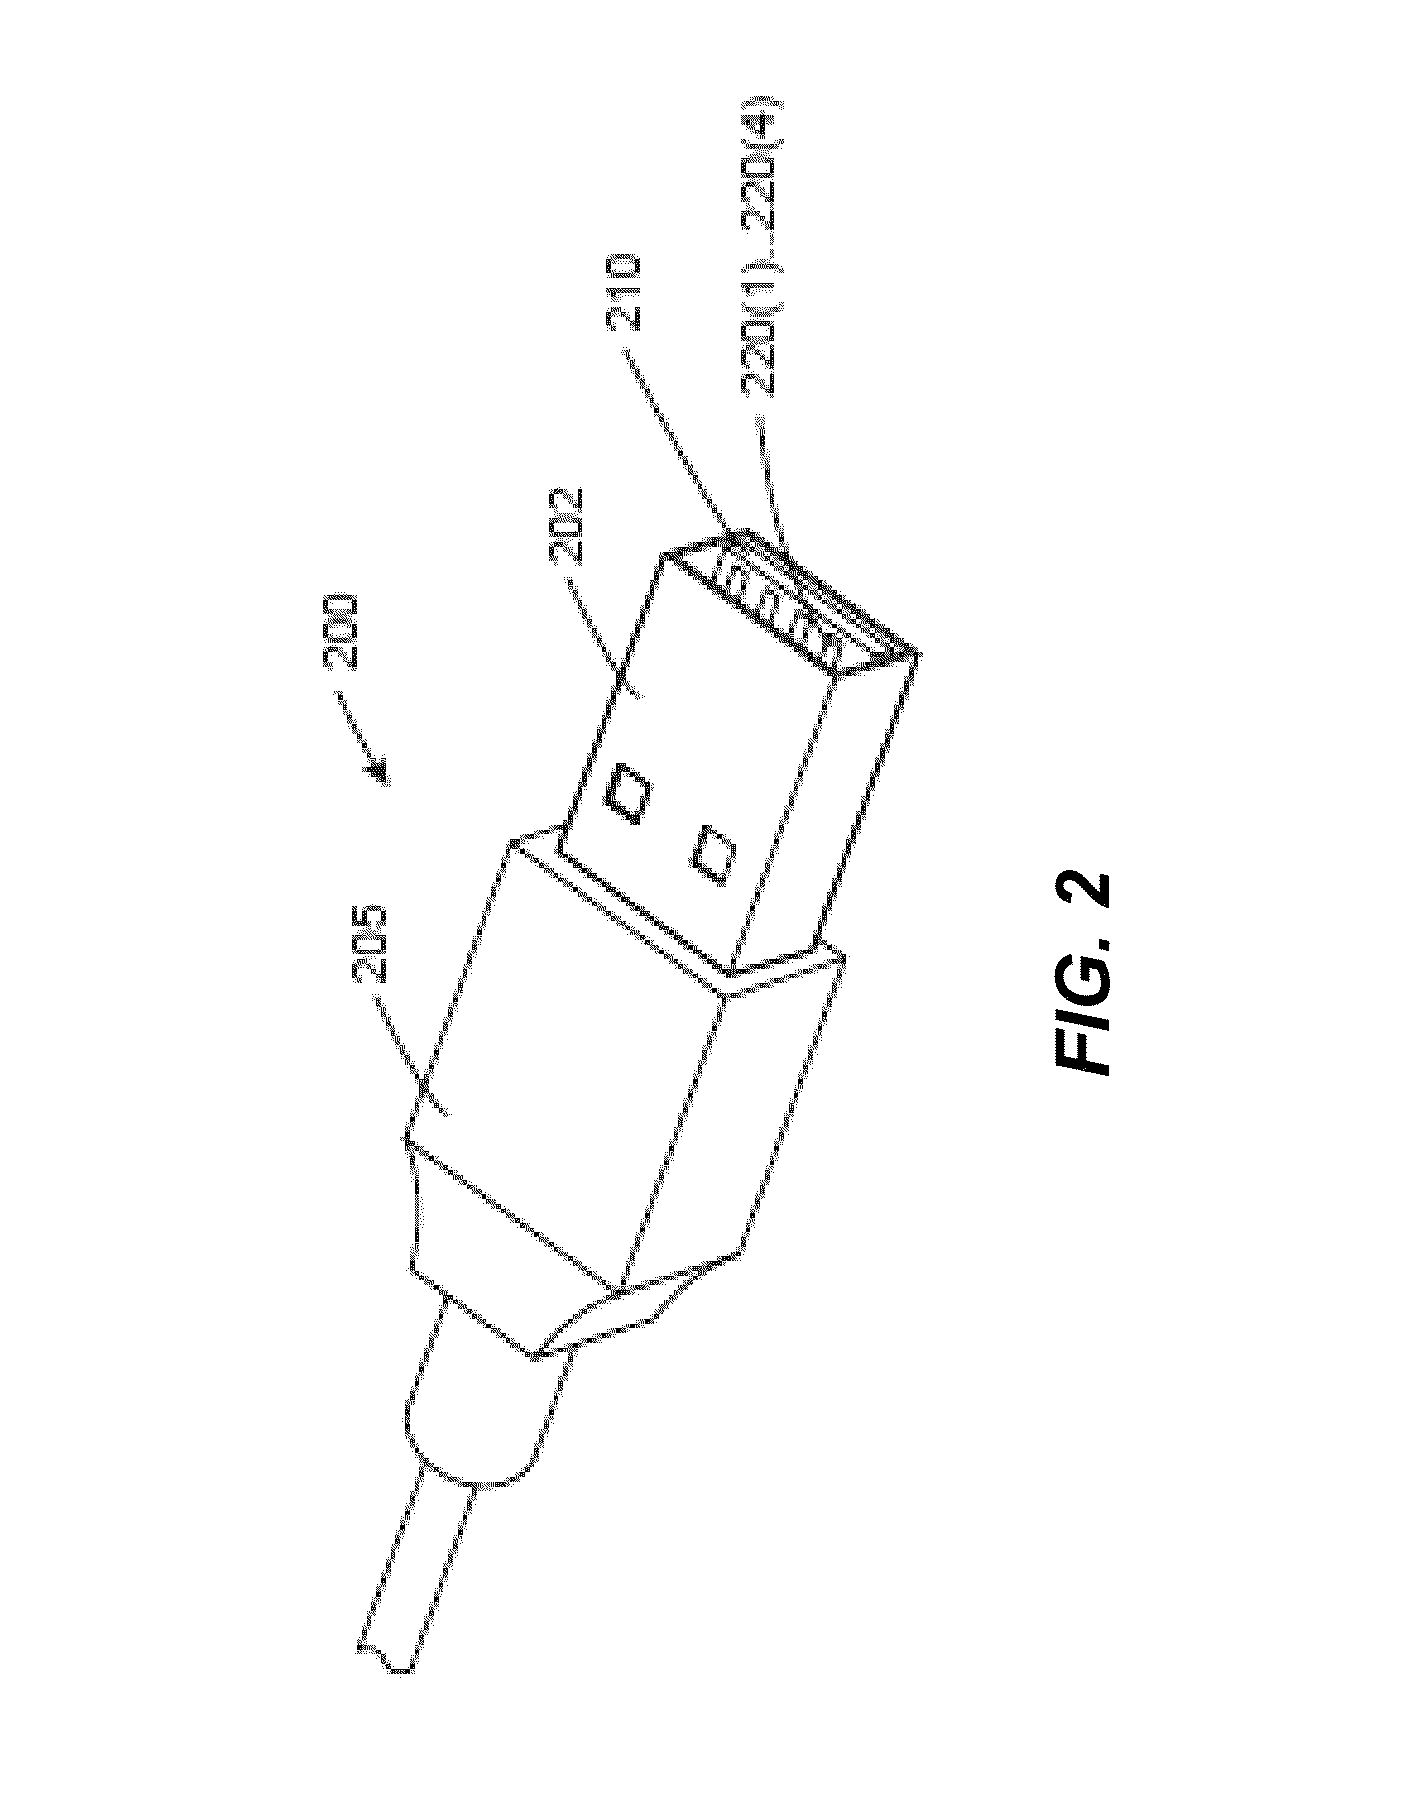 Method for improving connector enclosure adhesion